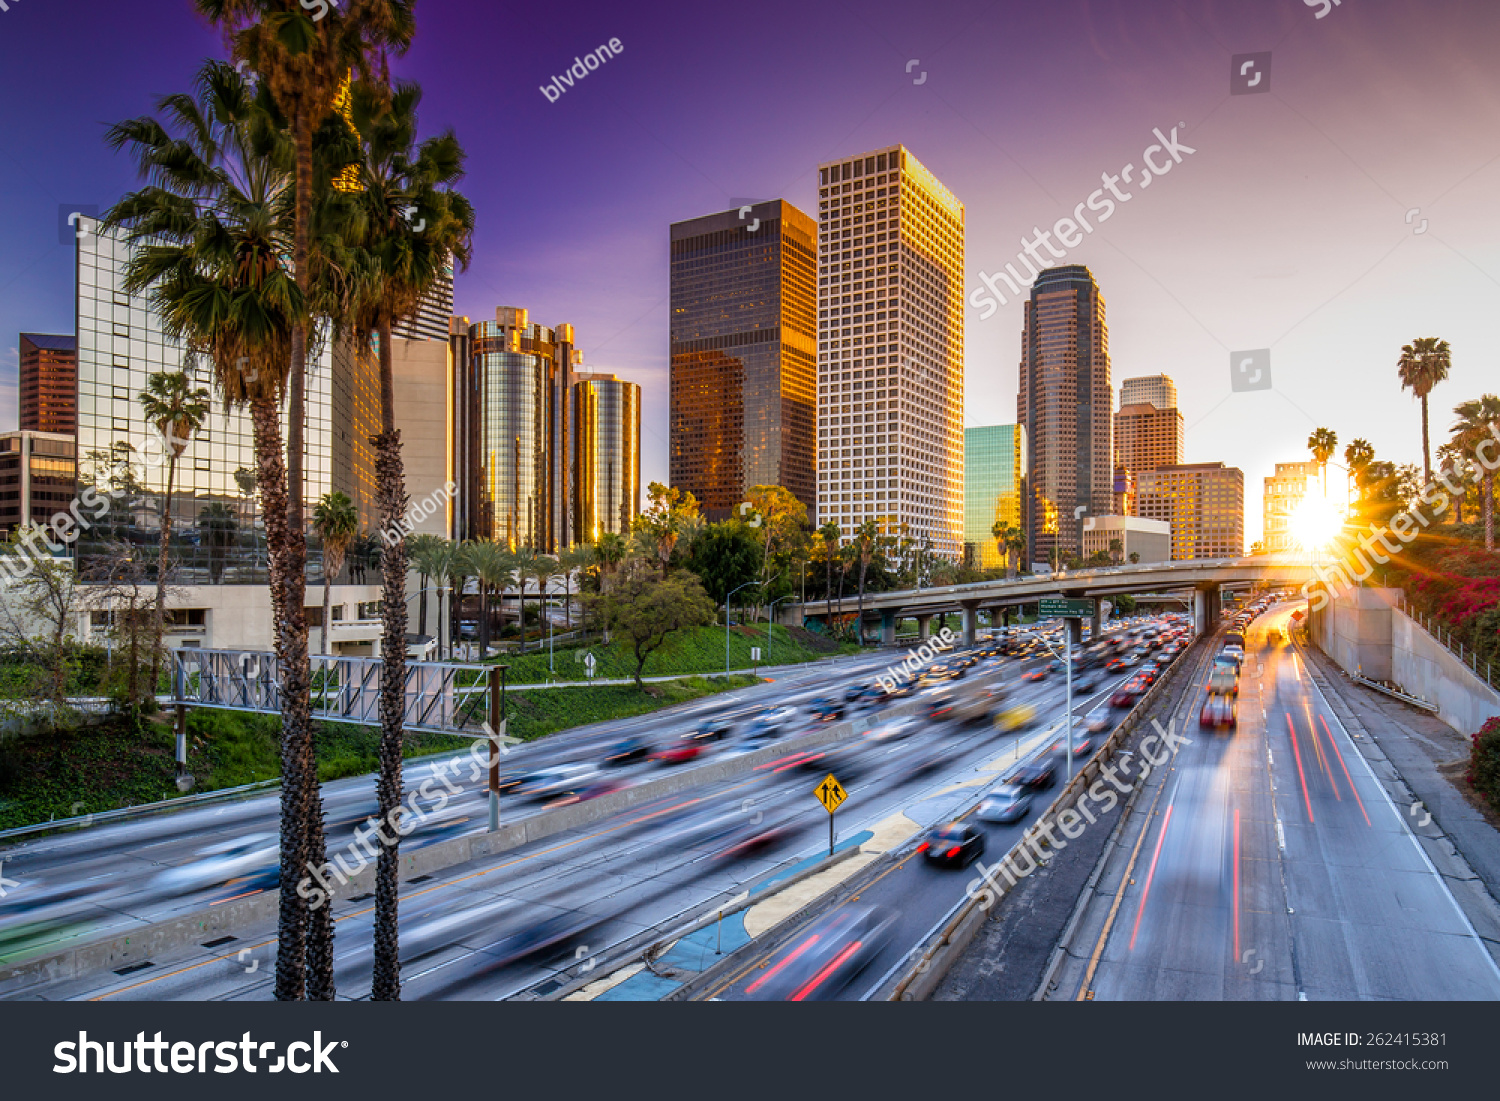 Los Angeles downtown buildings and highway car traffic at sunset #262415381